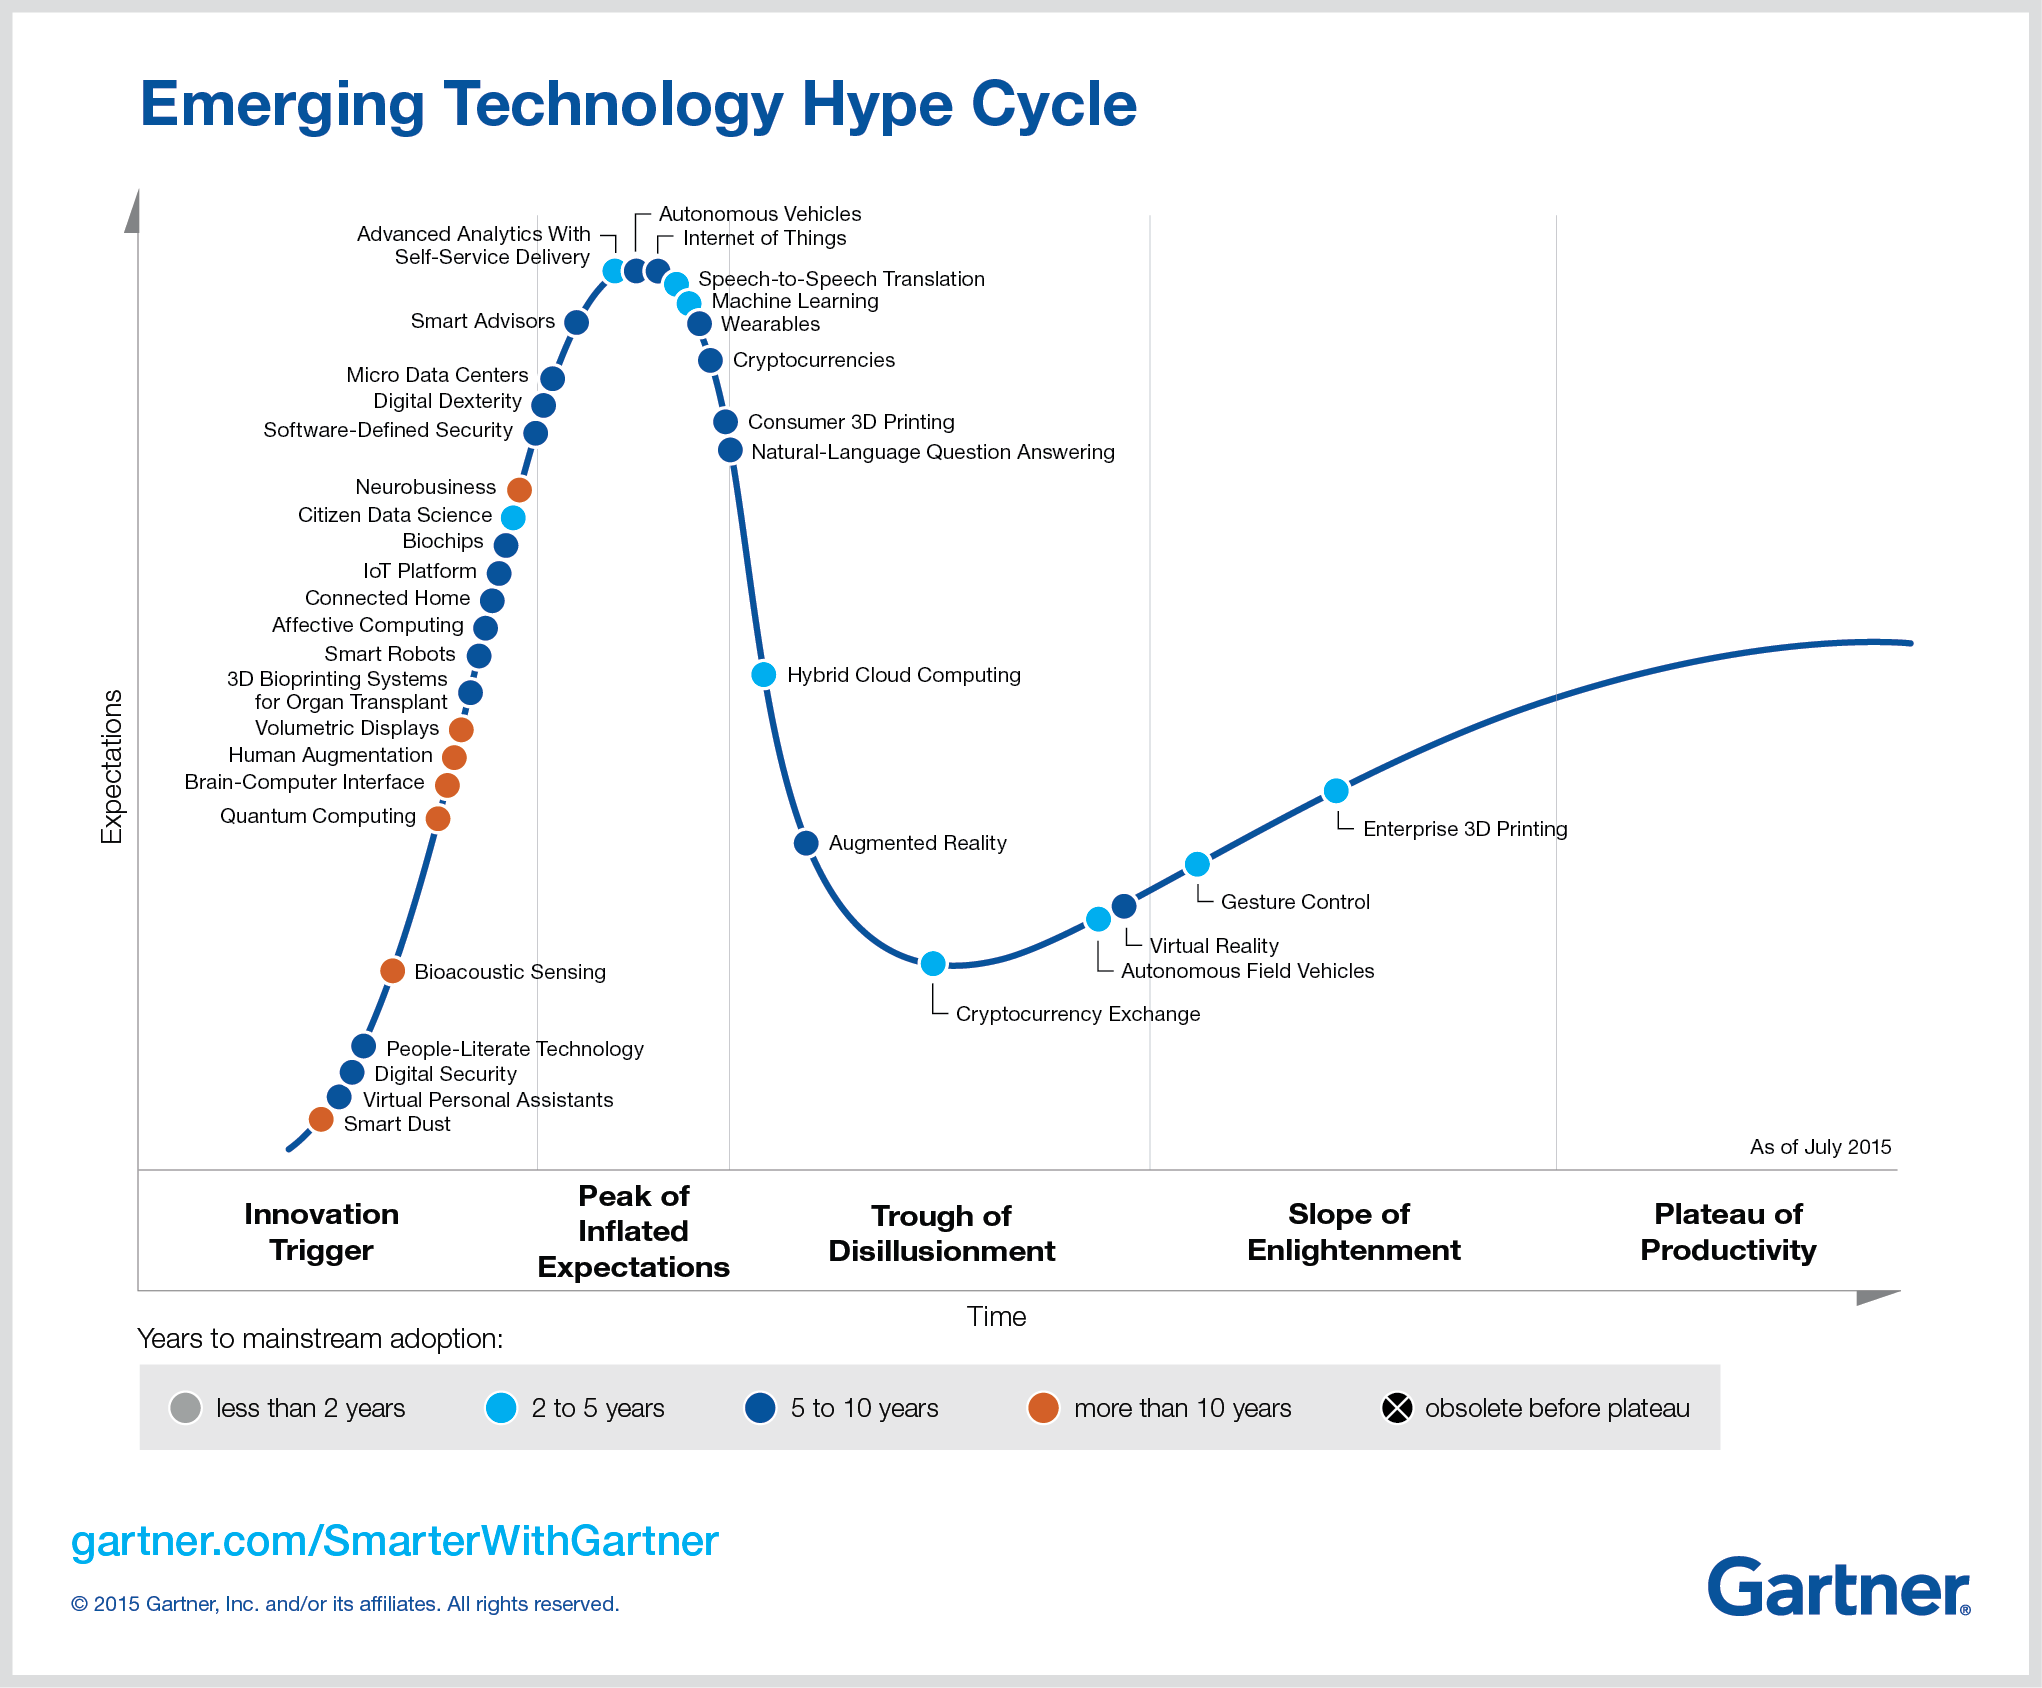 Gartners Hypecycle: Augmented Reality und Virtual Reality kommen